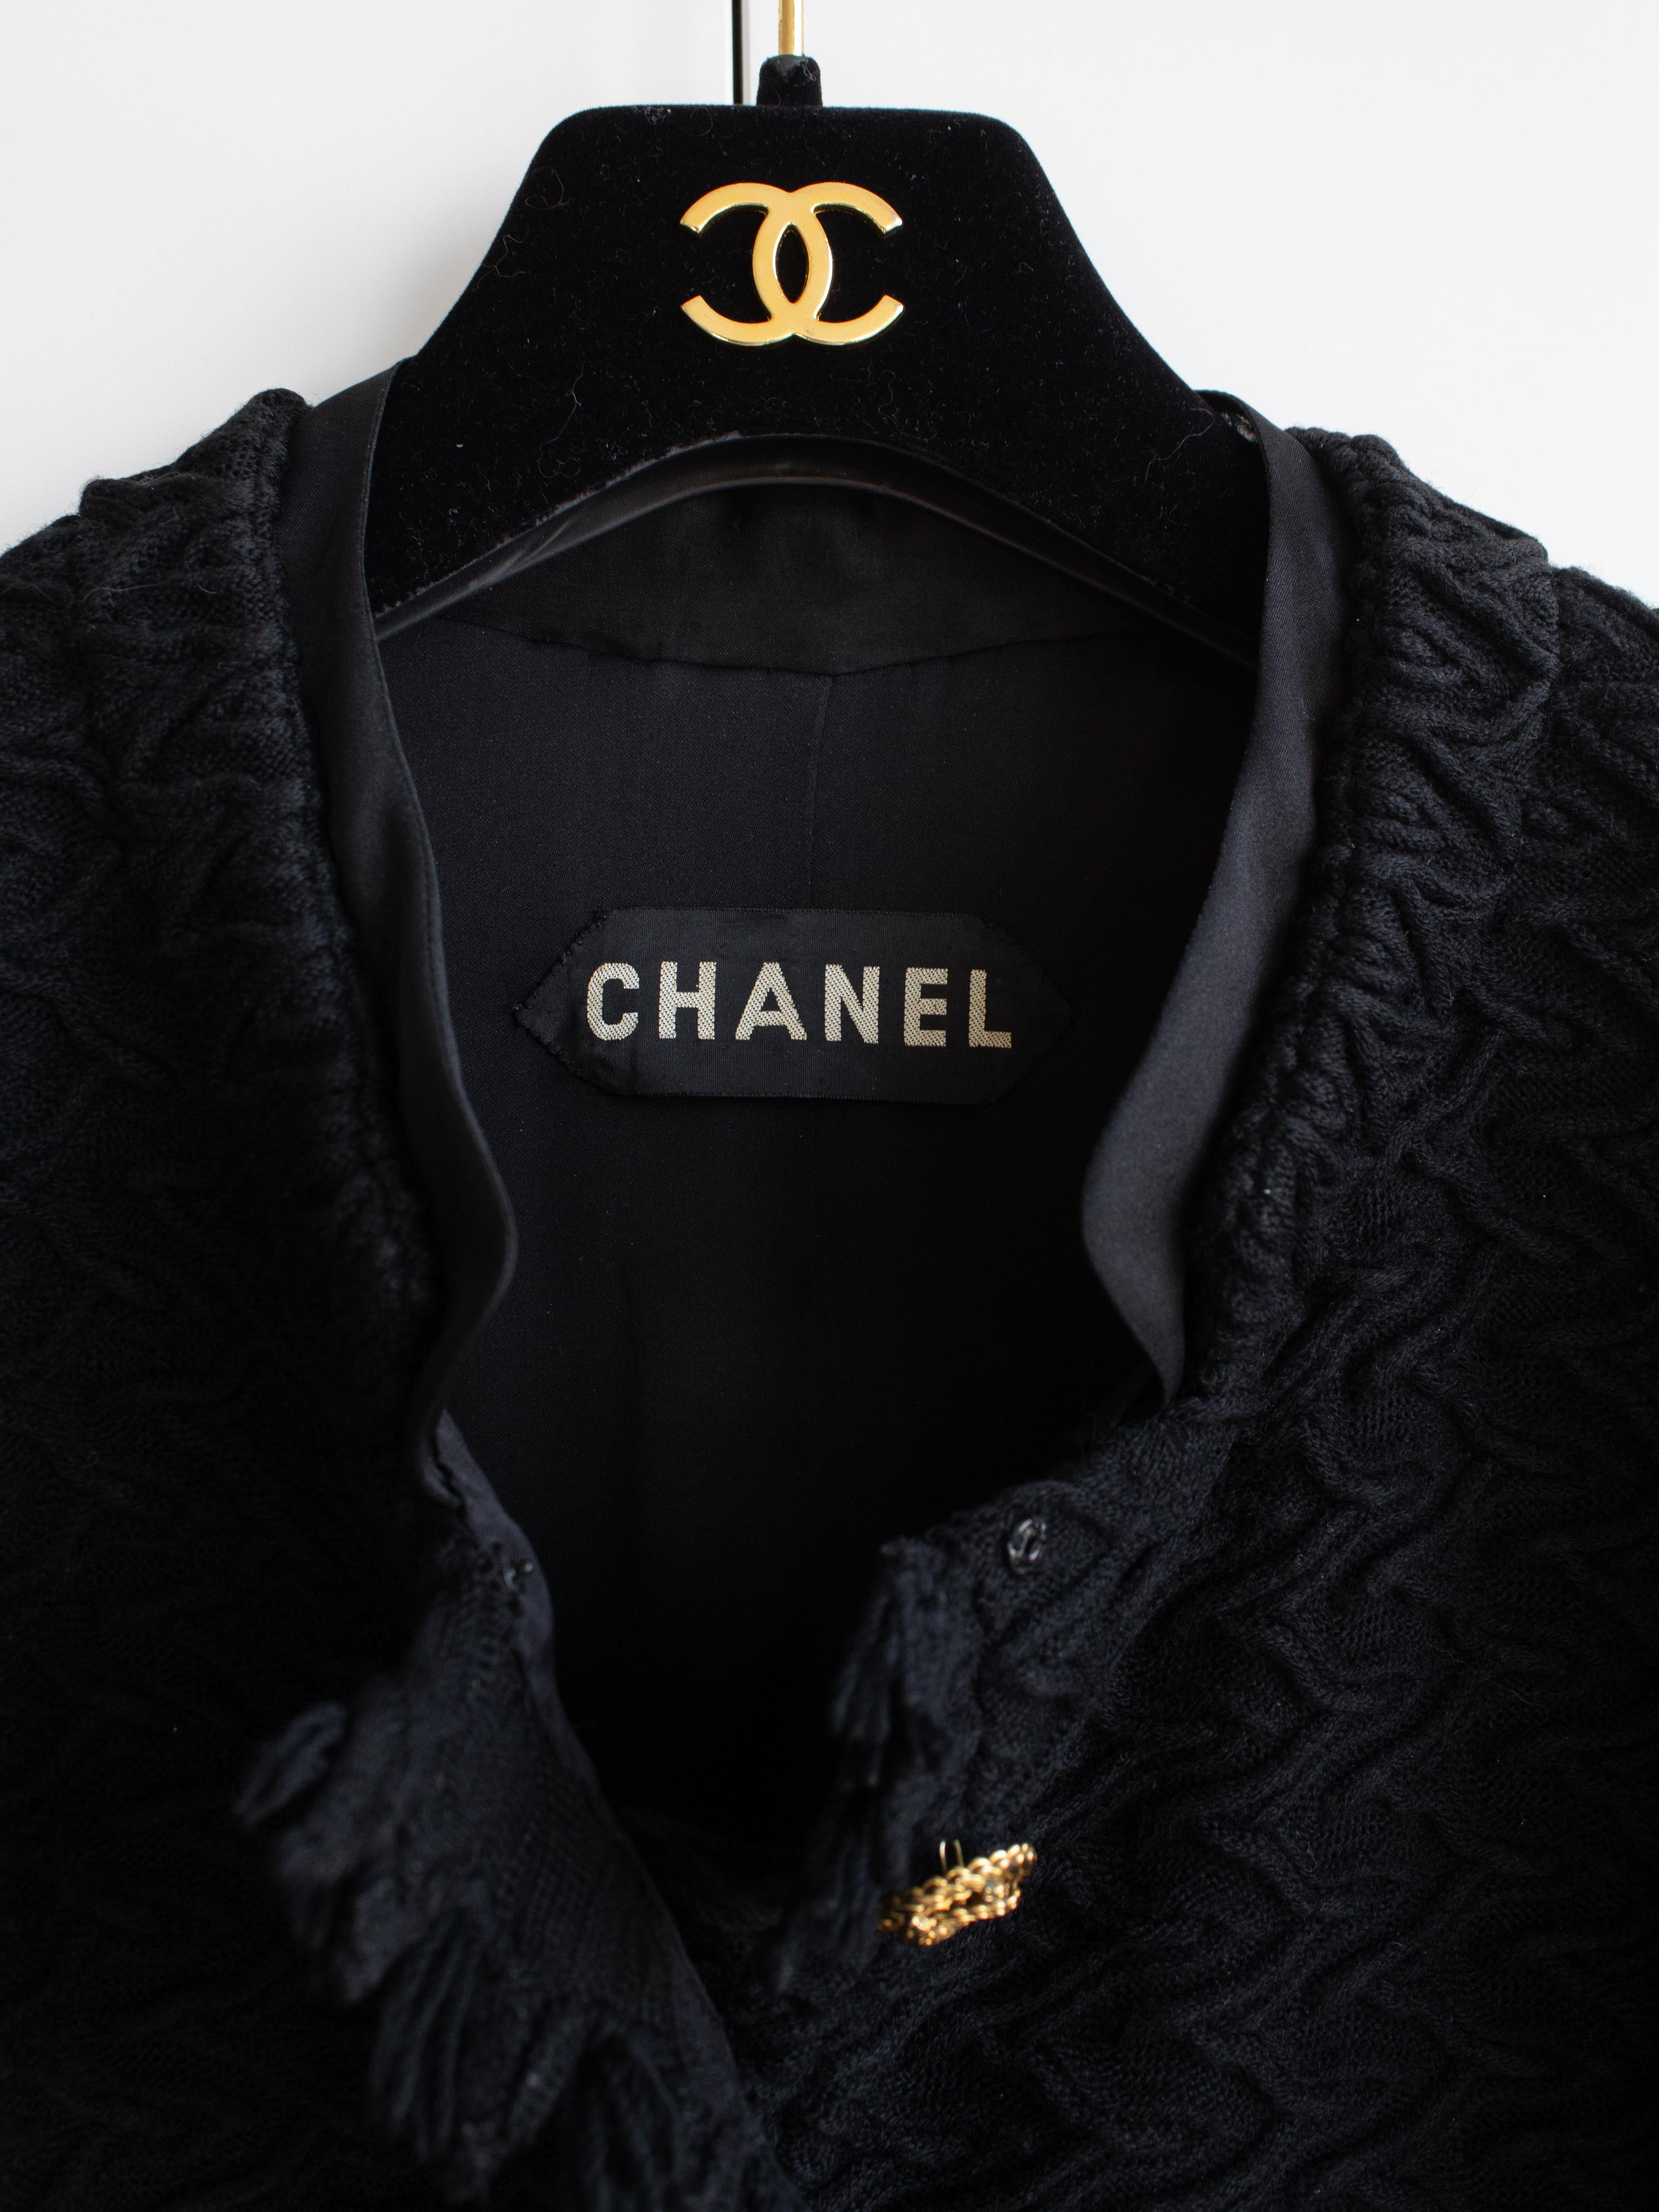 Rare Chanel Haute Couture F/W 1970 Jackie Black Gold CC Fringe LBJ Tweed Jacket For Sale 4